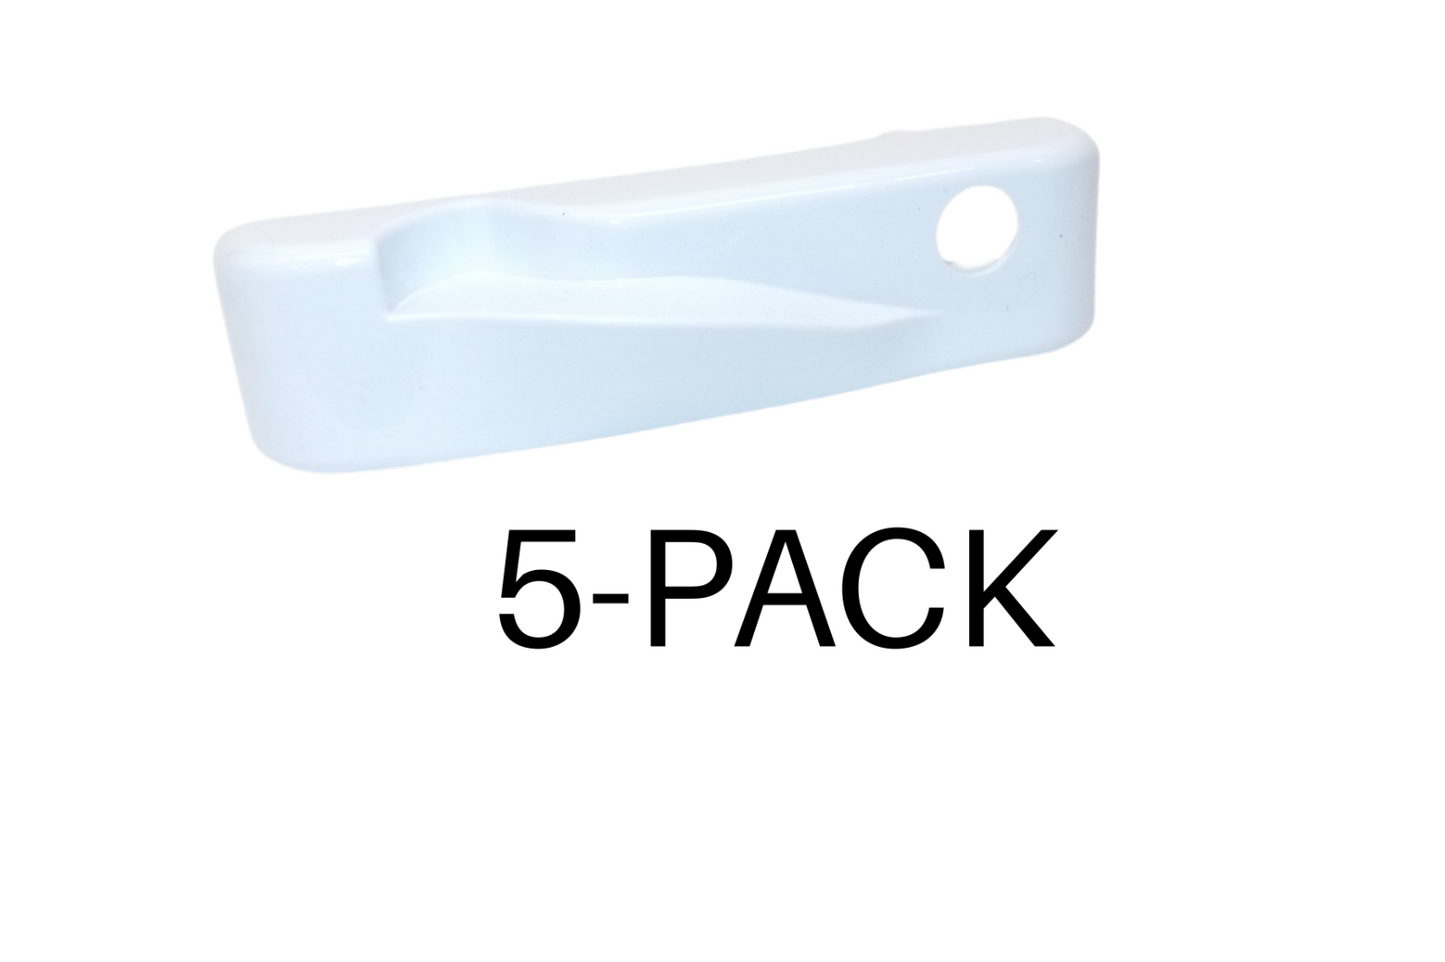 5-PACK AMESBURY TRUTH ENCORE OPERATOR COVER WHITE LH FOR TANGO